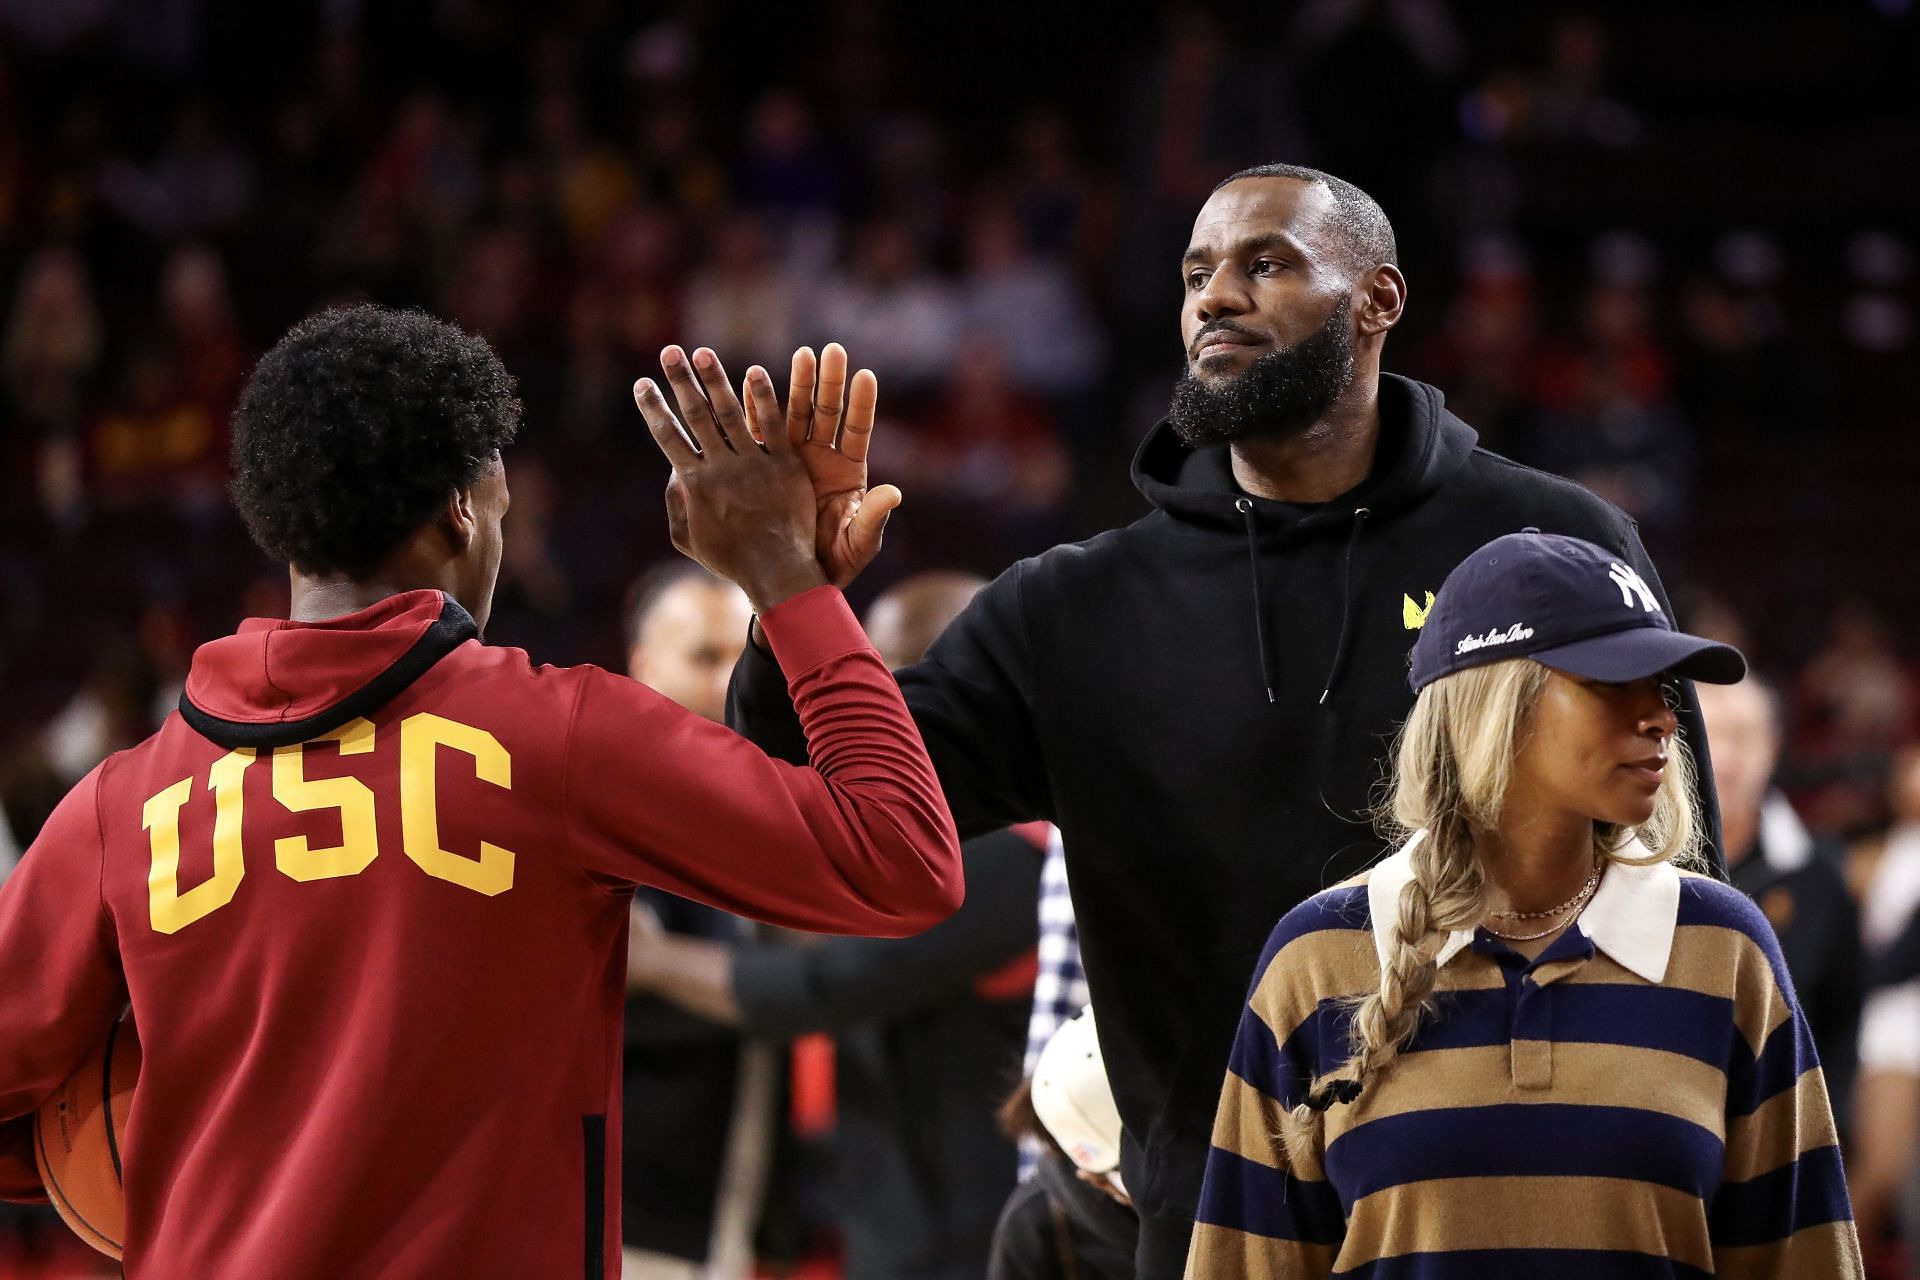 LeBron James (right) high-fives his son Bronny James (left)